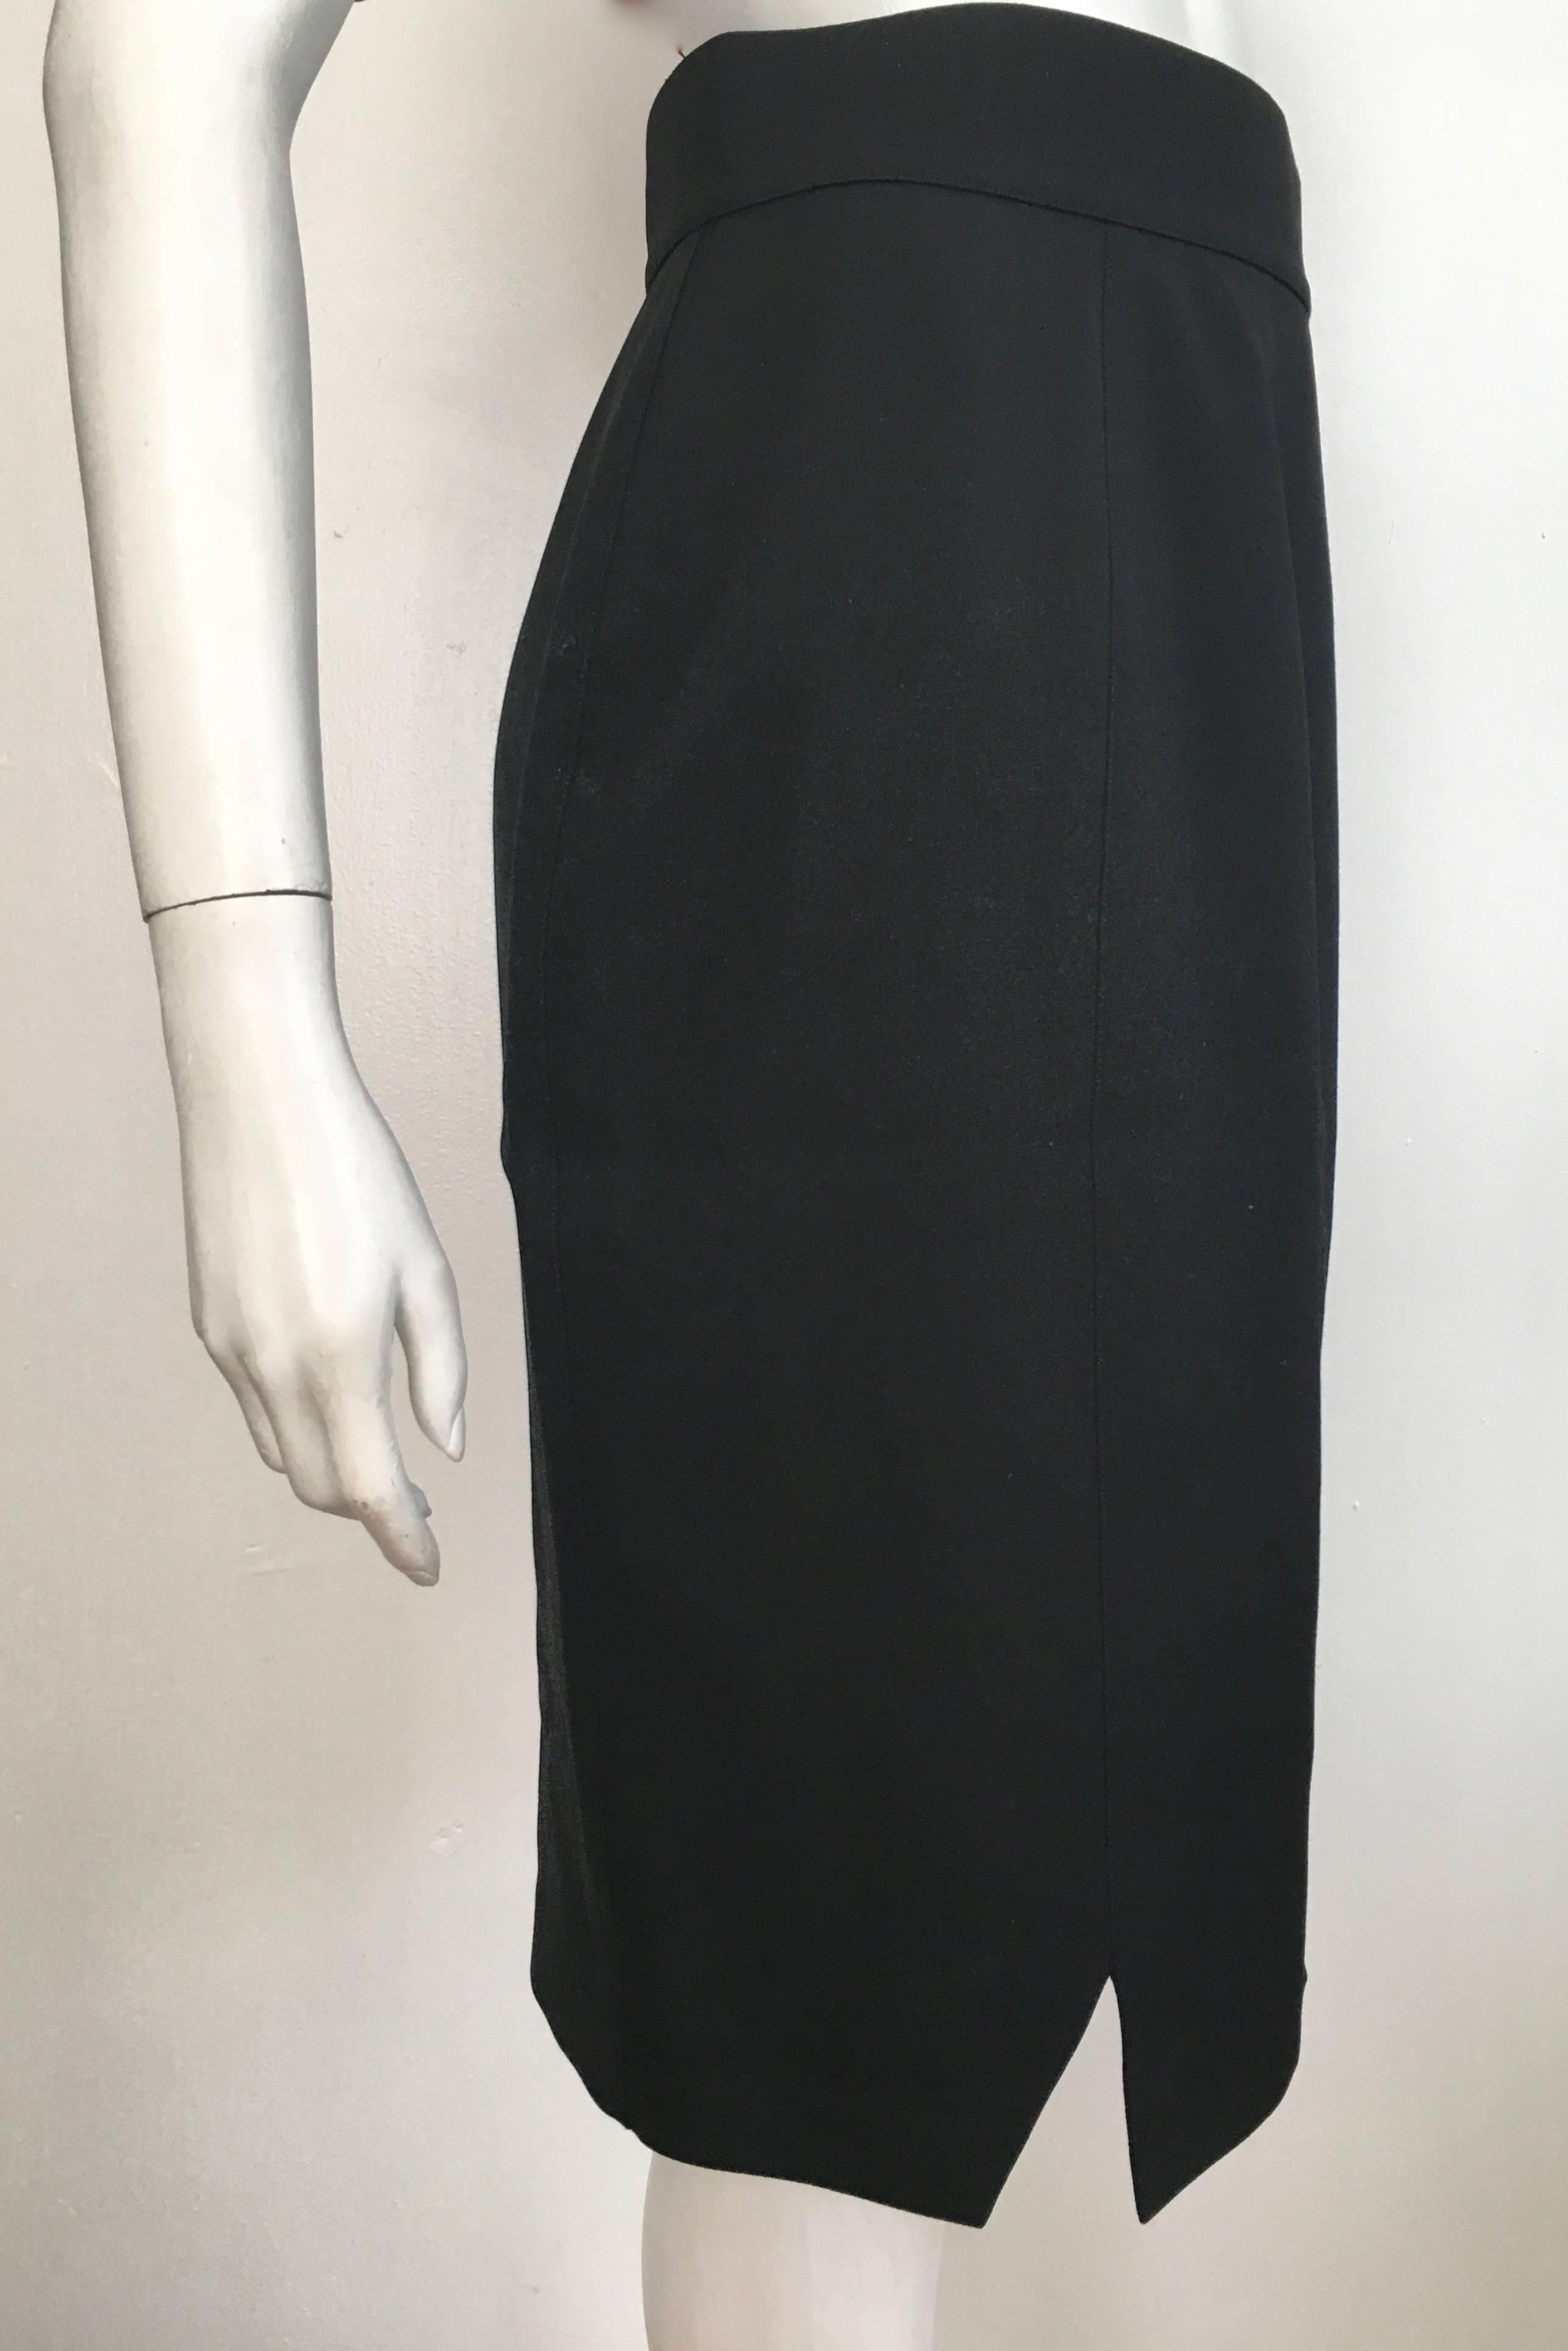 Thierry Mugler 1980s Black Wool Pencil Skirt Size 6. For Sale 2